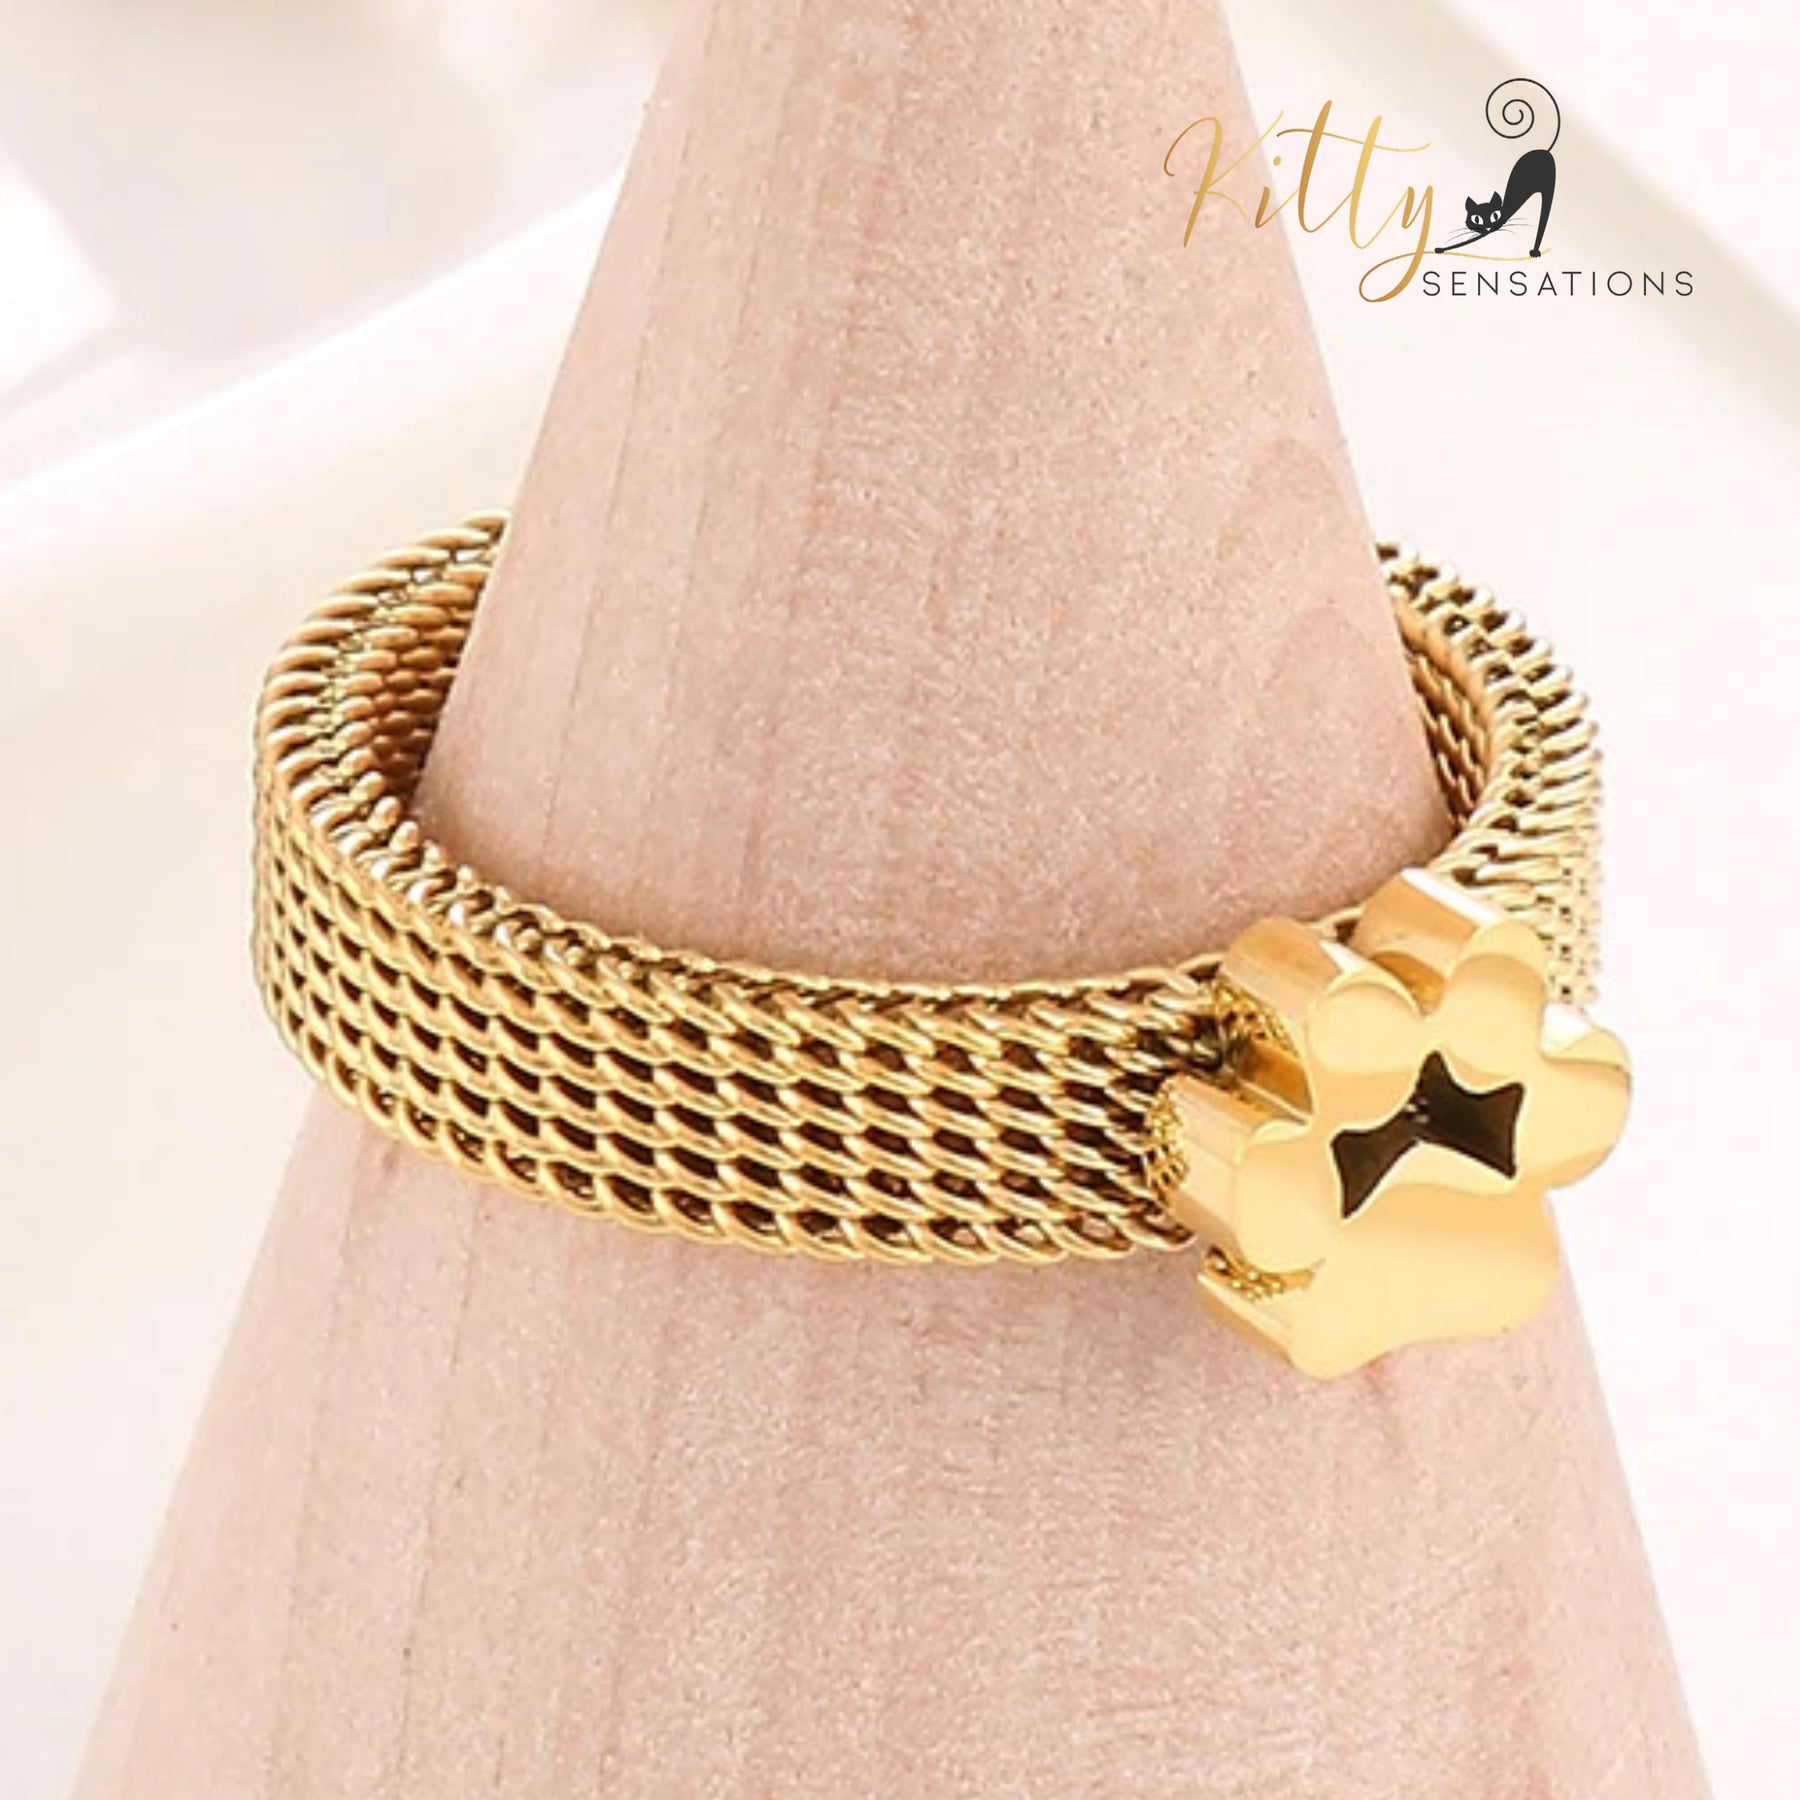 www.KittySensations.com: Very Stylish, Mesh Band Cat Paw Ring (Gold, Silver, or Rose Gold) ($36.13): https://www.kittysensations.com/products/mesh-band-cat-paw-ring-gold-silver-or-rose-gold